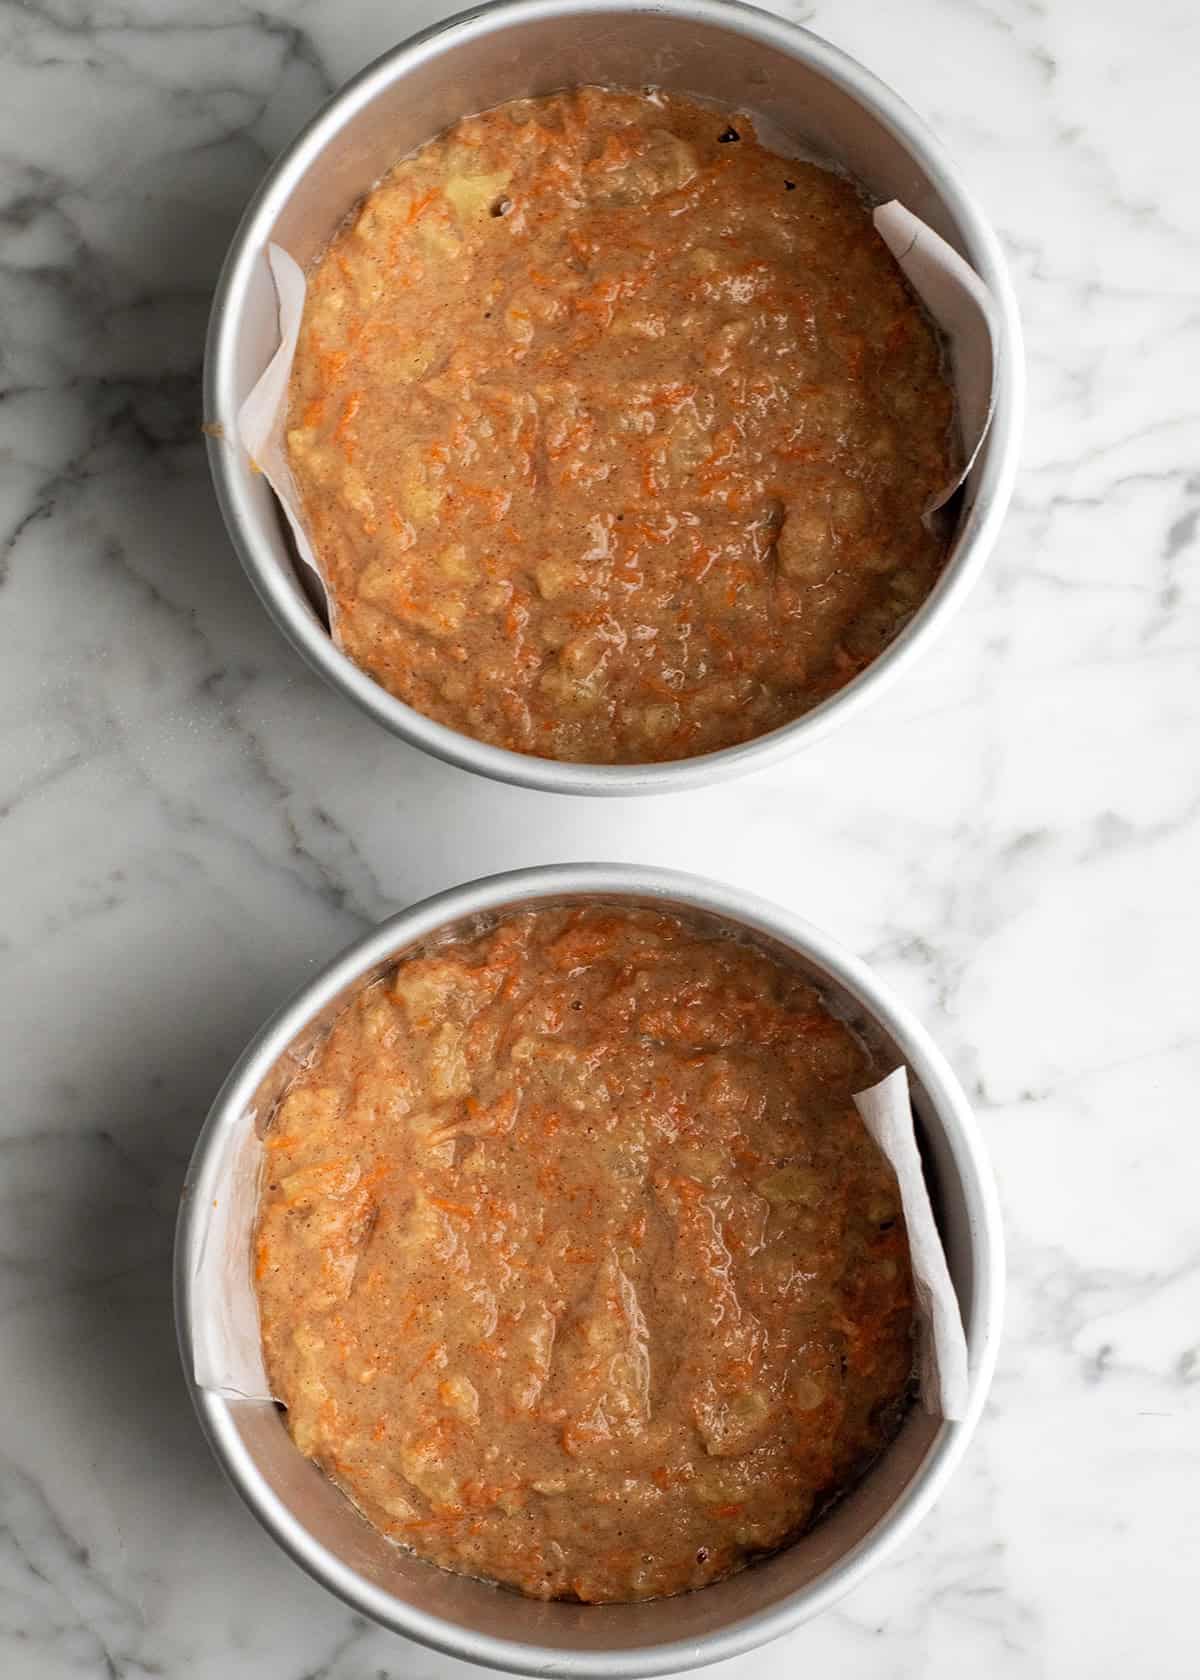 Healthy Carrot Cake batter in two cake pans before baking